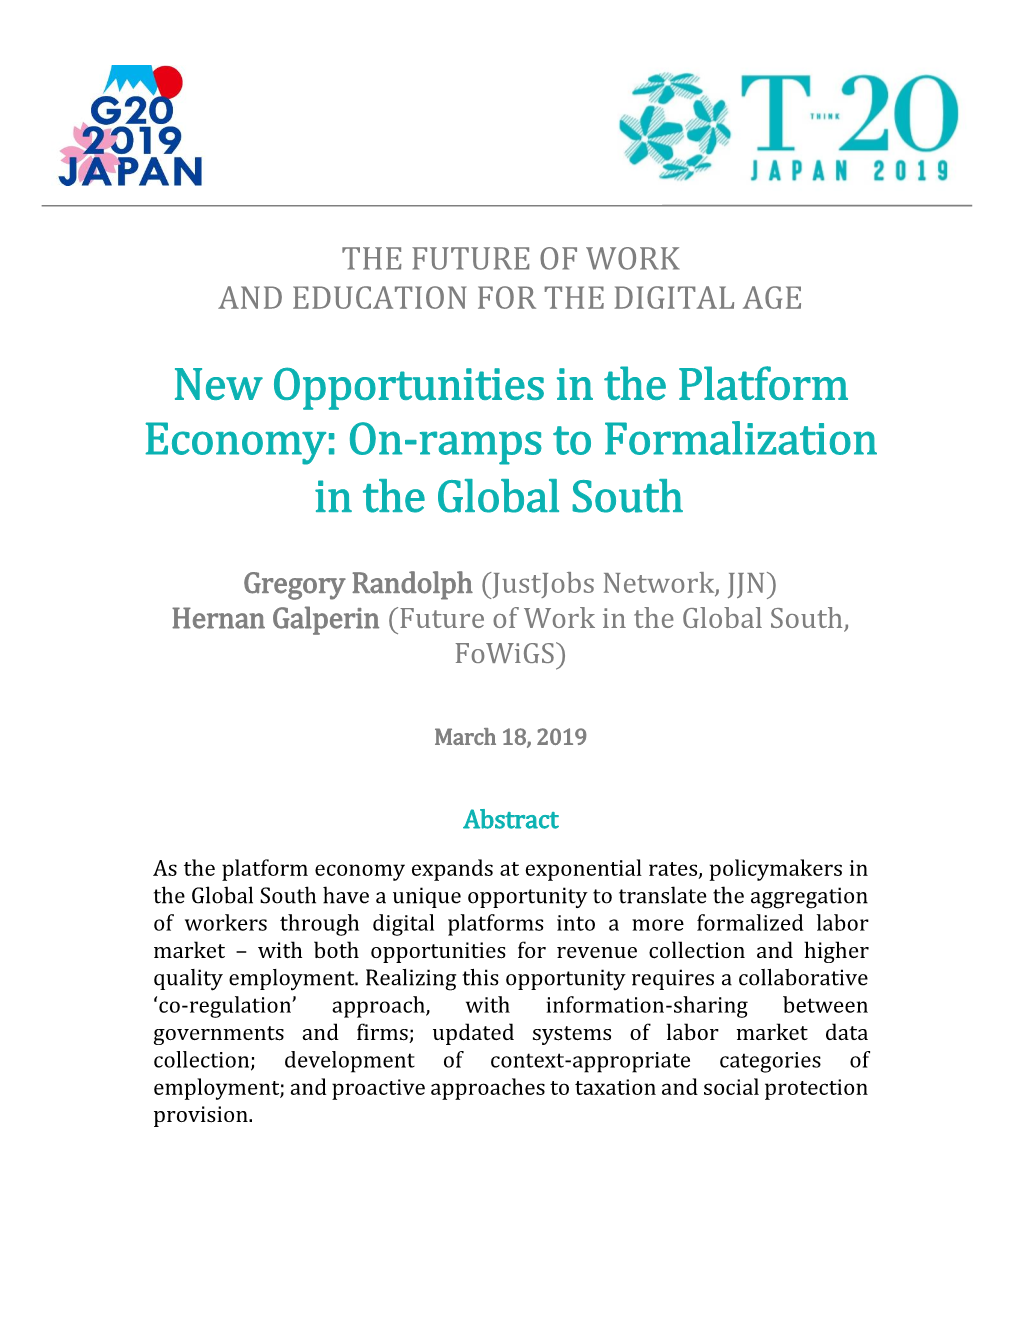 New Opportunities in the Platform Economy: On-Ramps to Formalization in the Global South